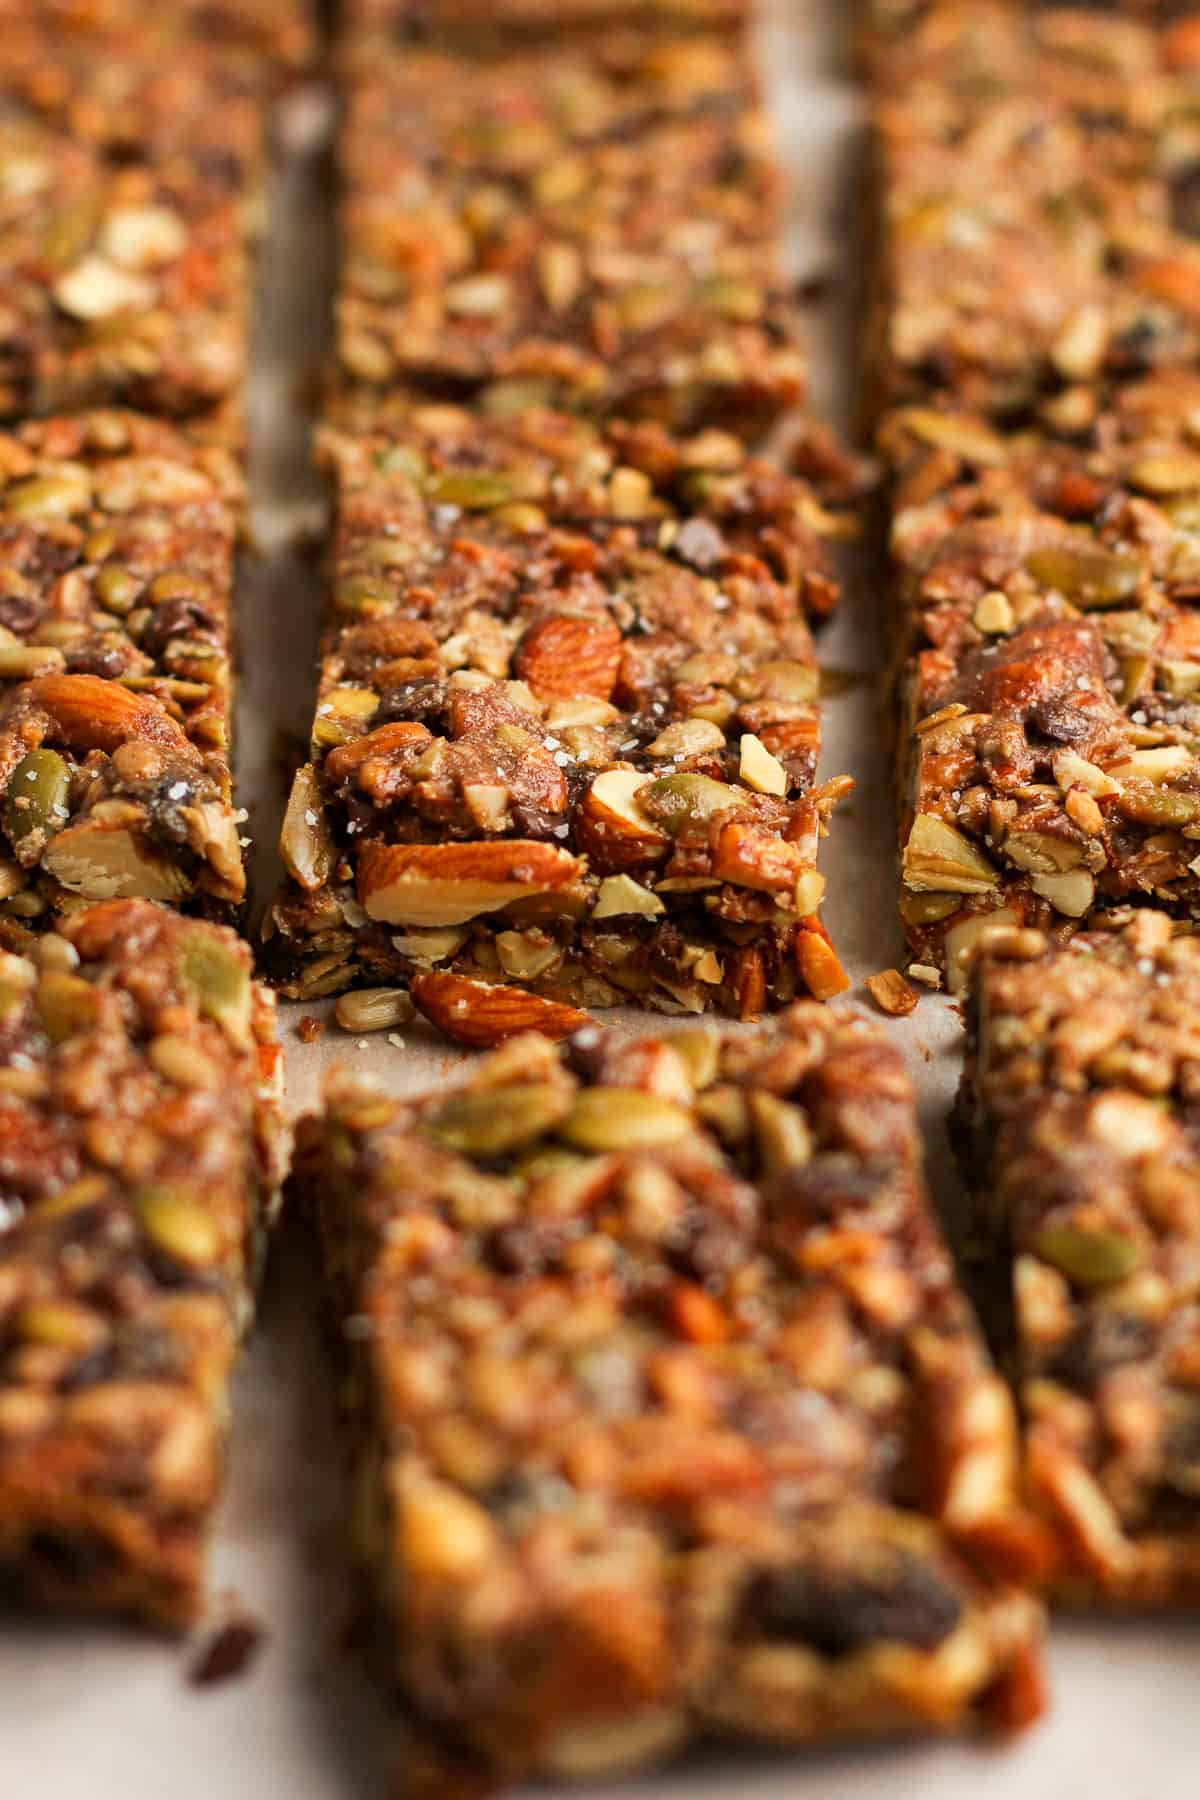 Side view of some granola bars.